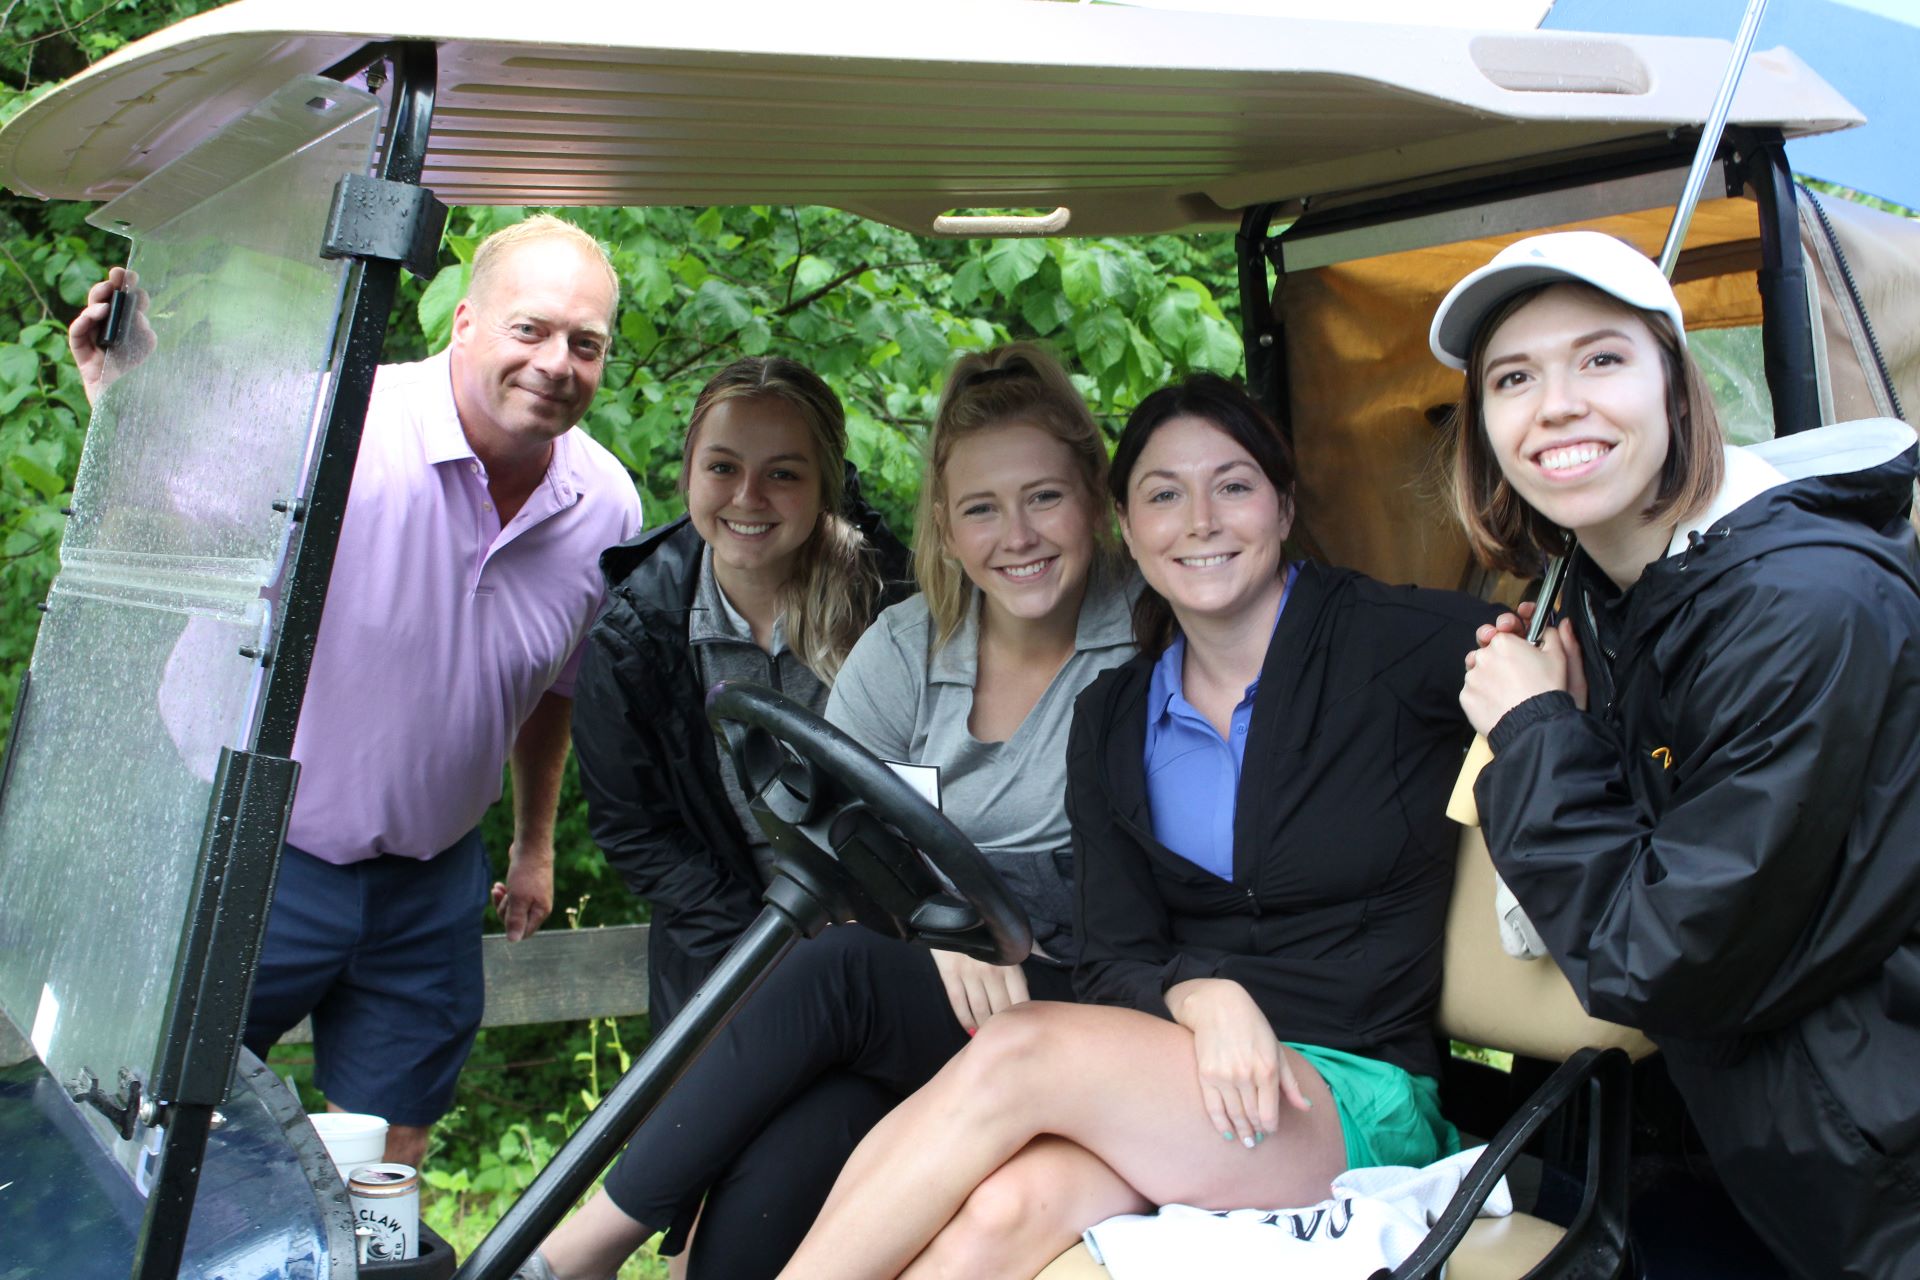 5 golfers posing in a golf cart at a charity golf outing